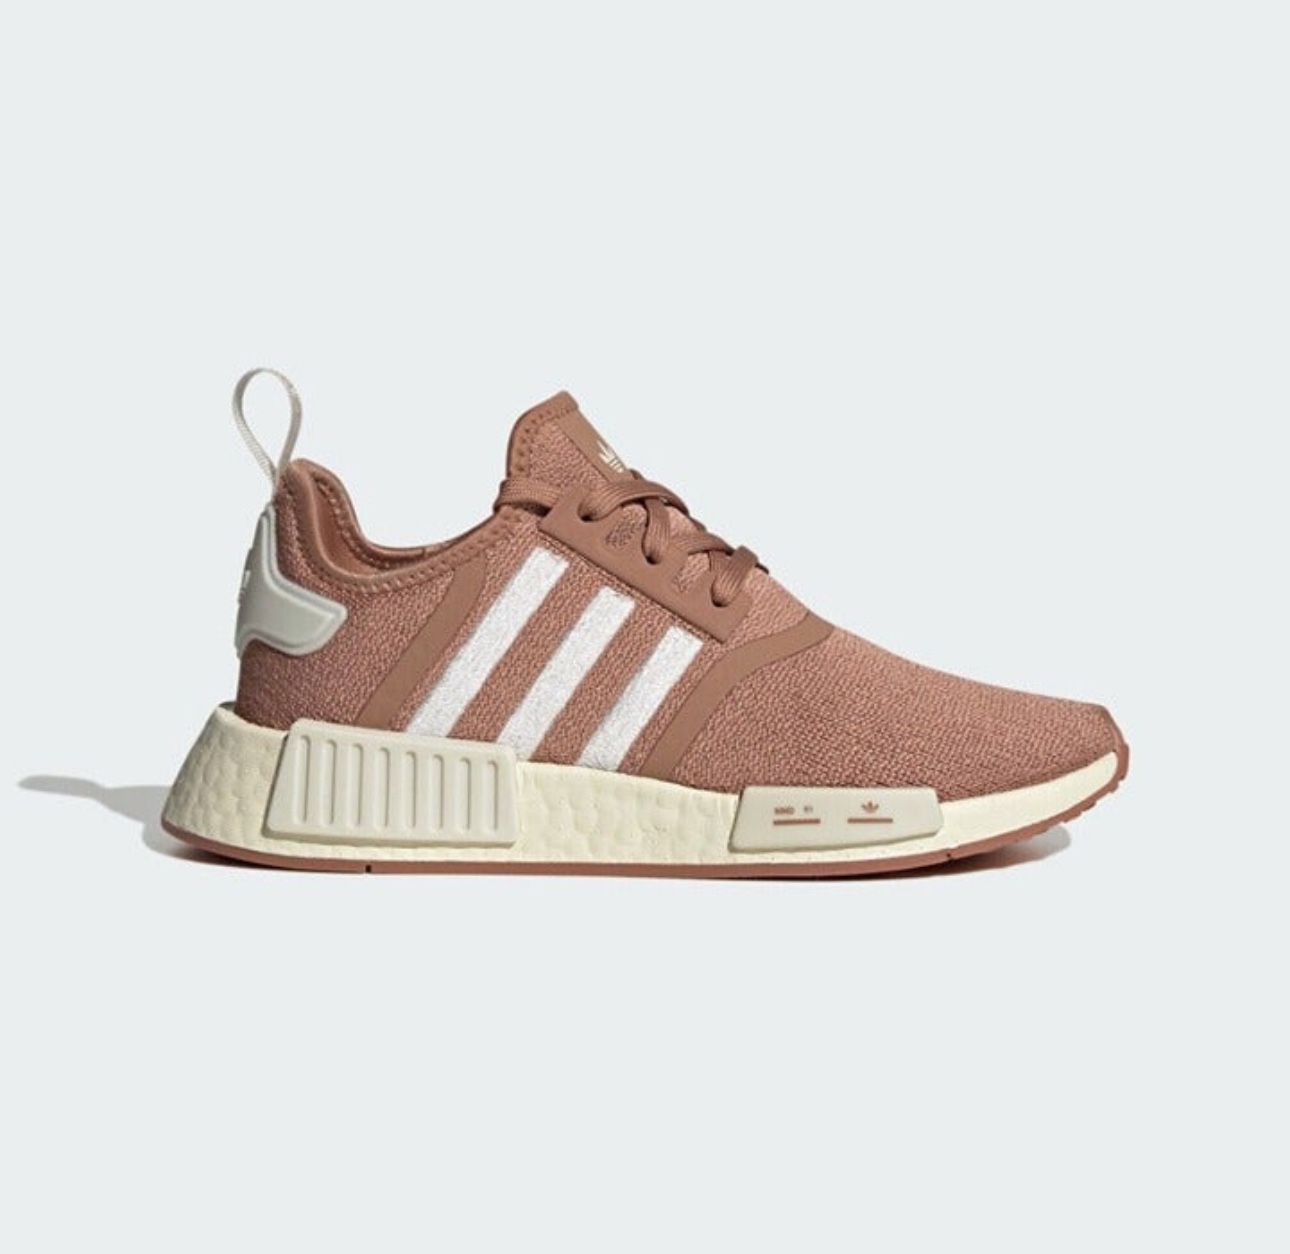 [NEW] Women's adidas NMD_R1 Shoes Size 8.5 IG8336